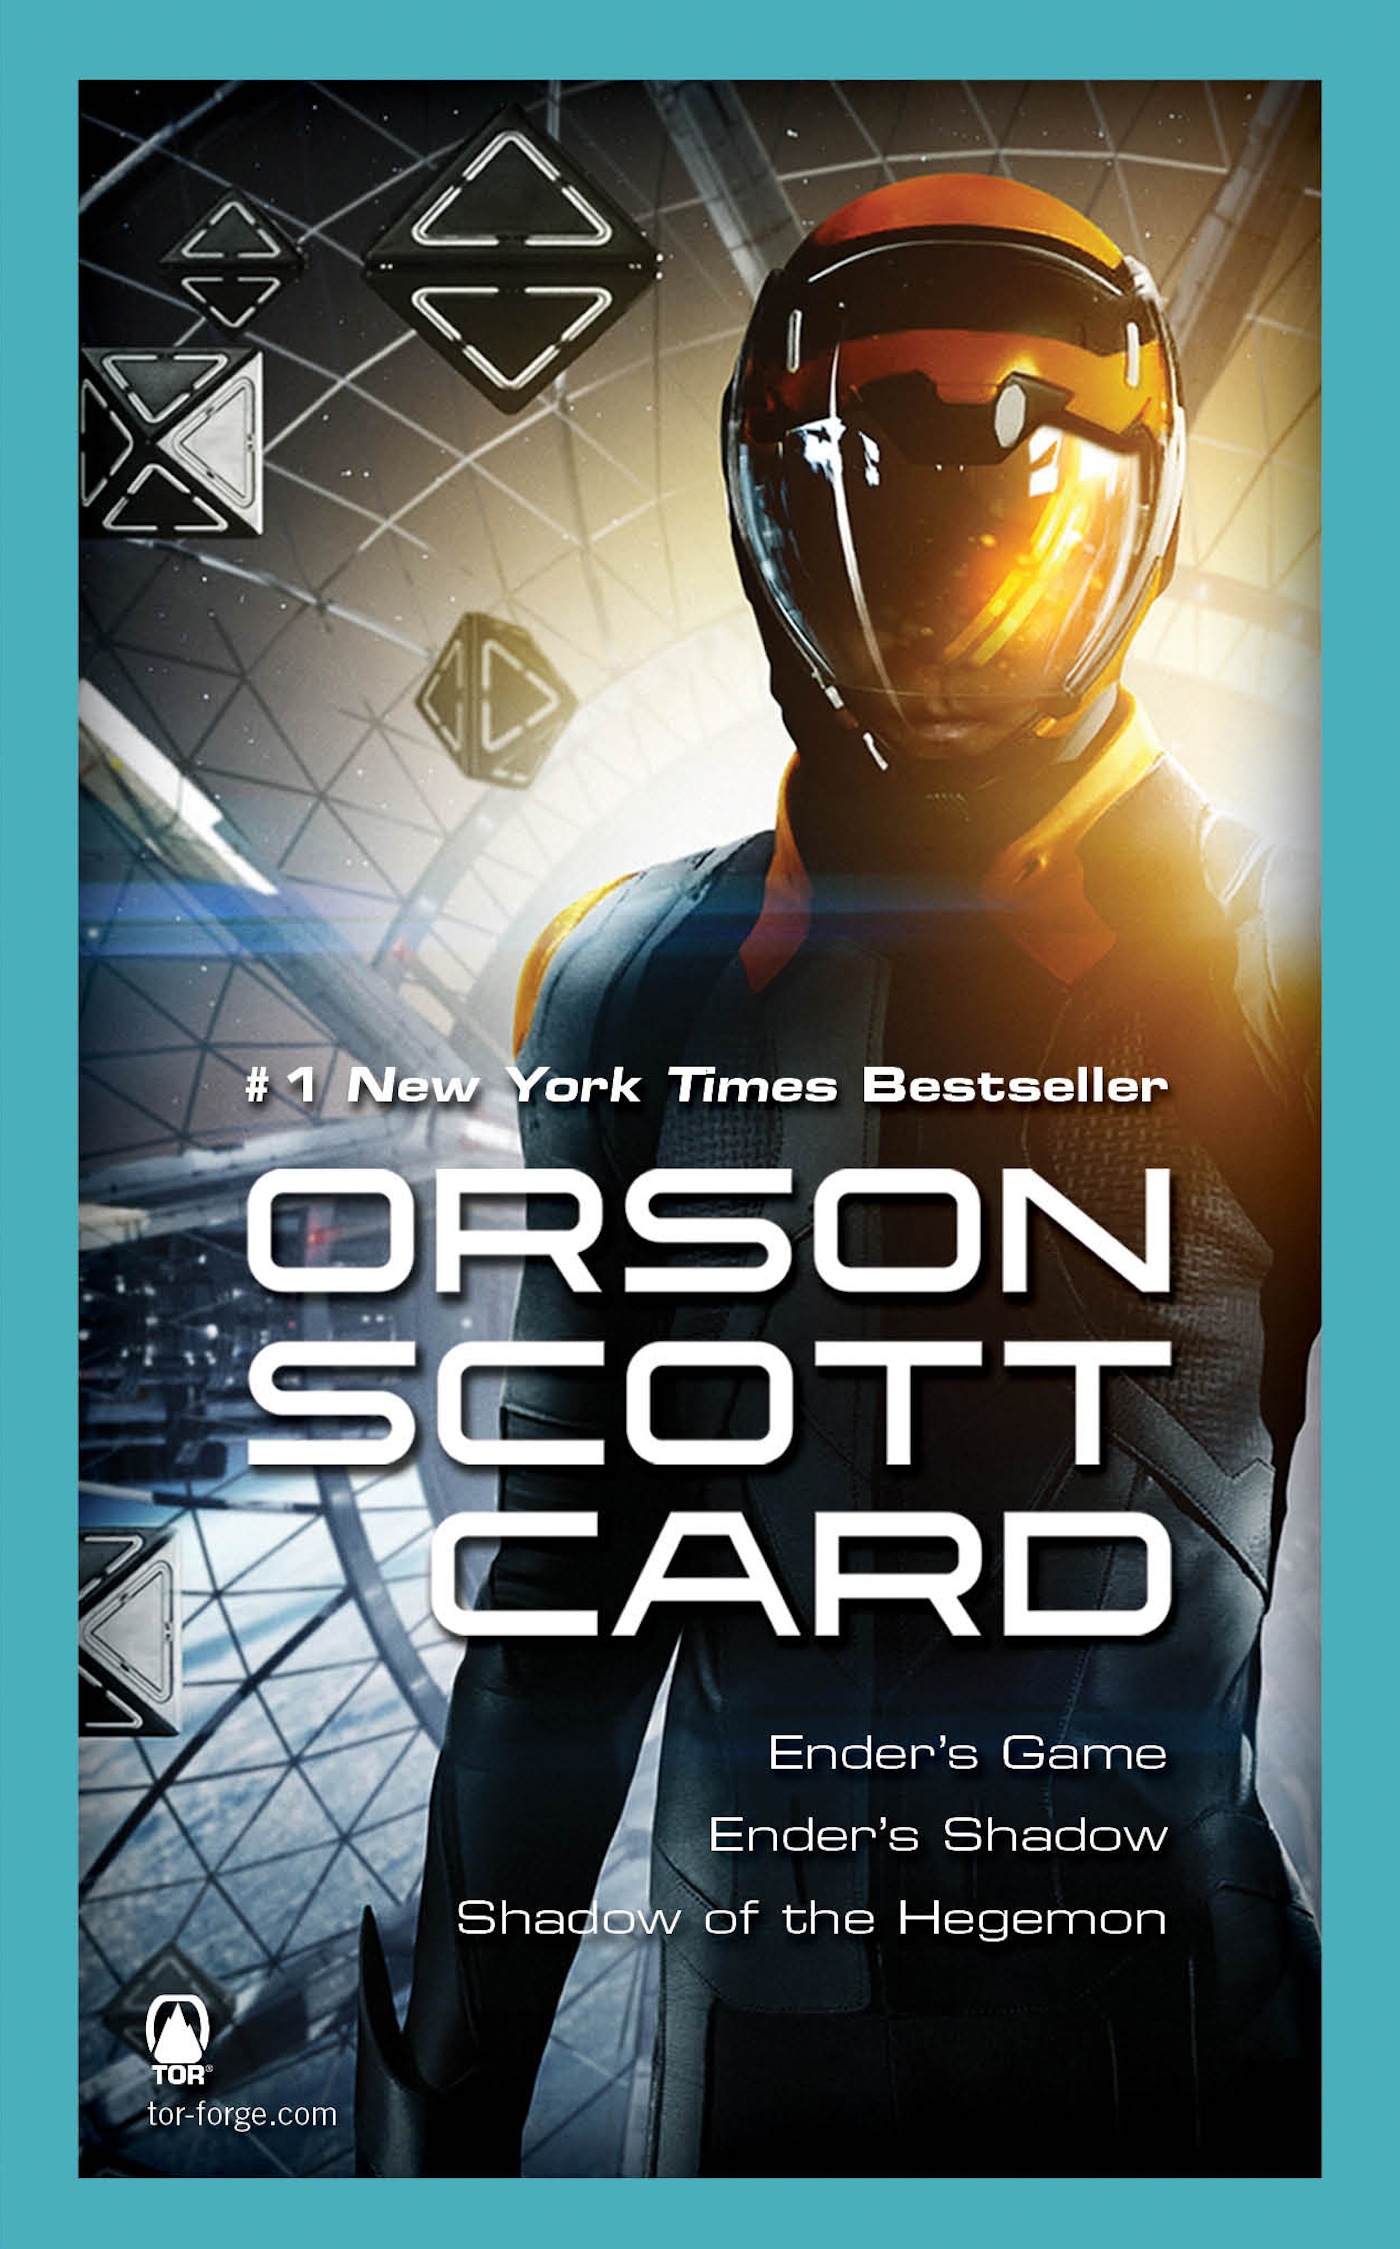 Ender's Game Boxed Set I : Ender's Game, Ender's Shadow, Shadow of the Hegemon by Orson Scott Card